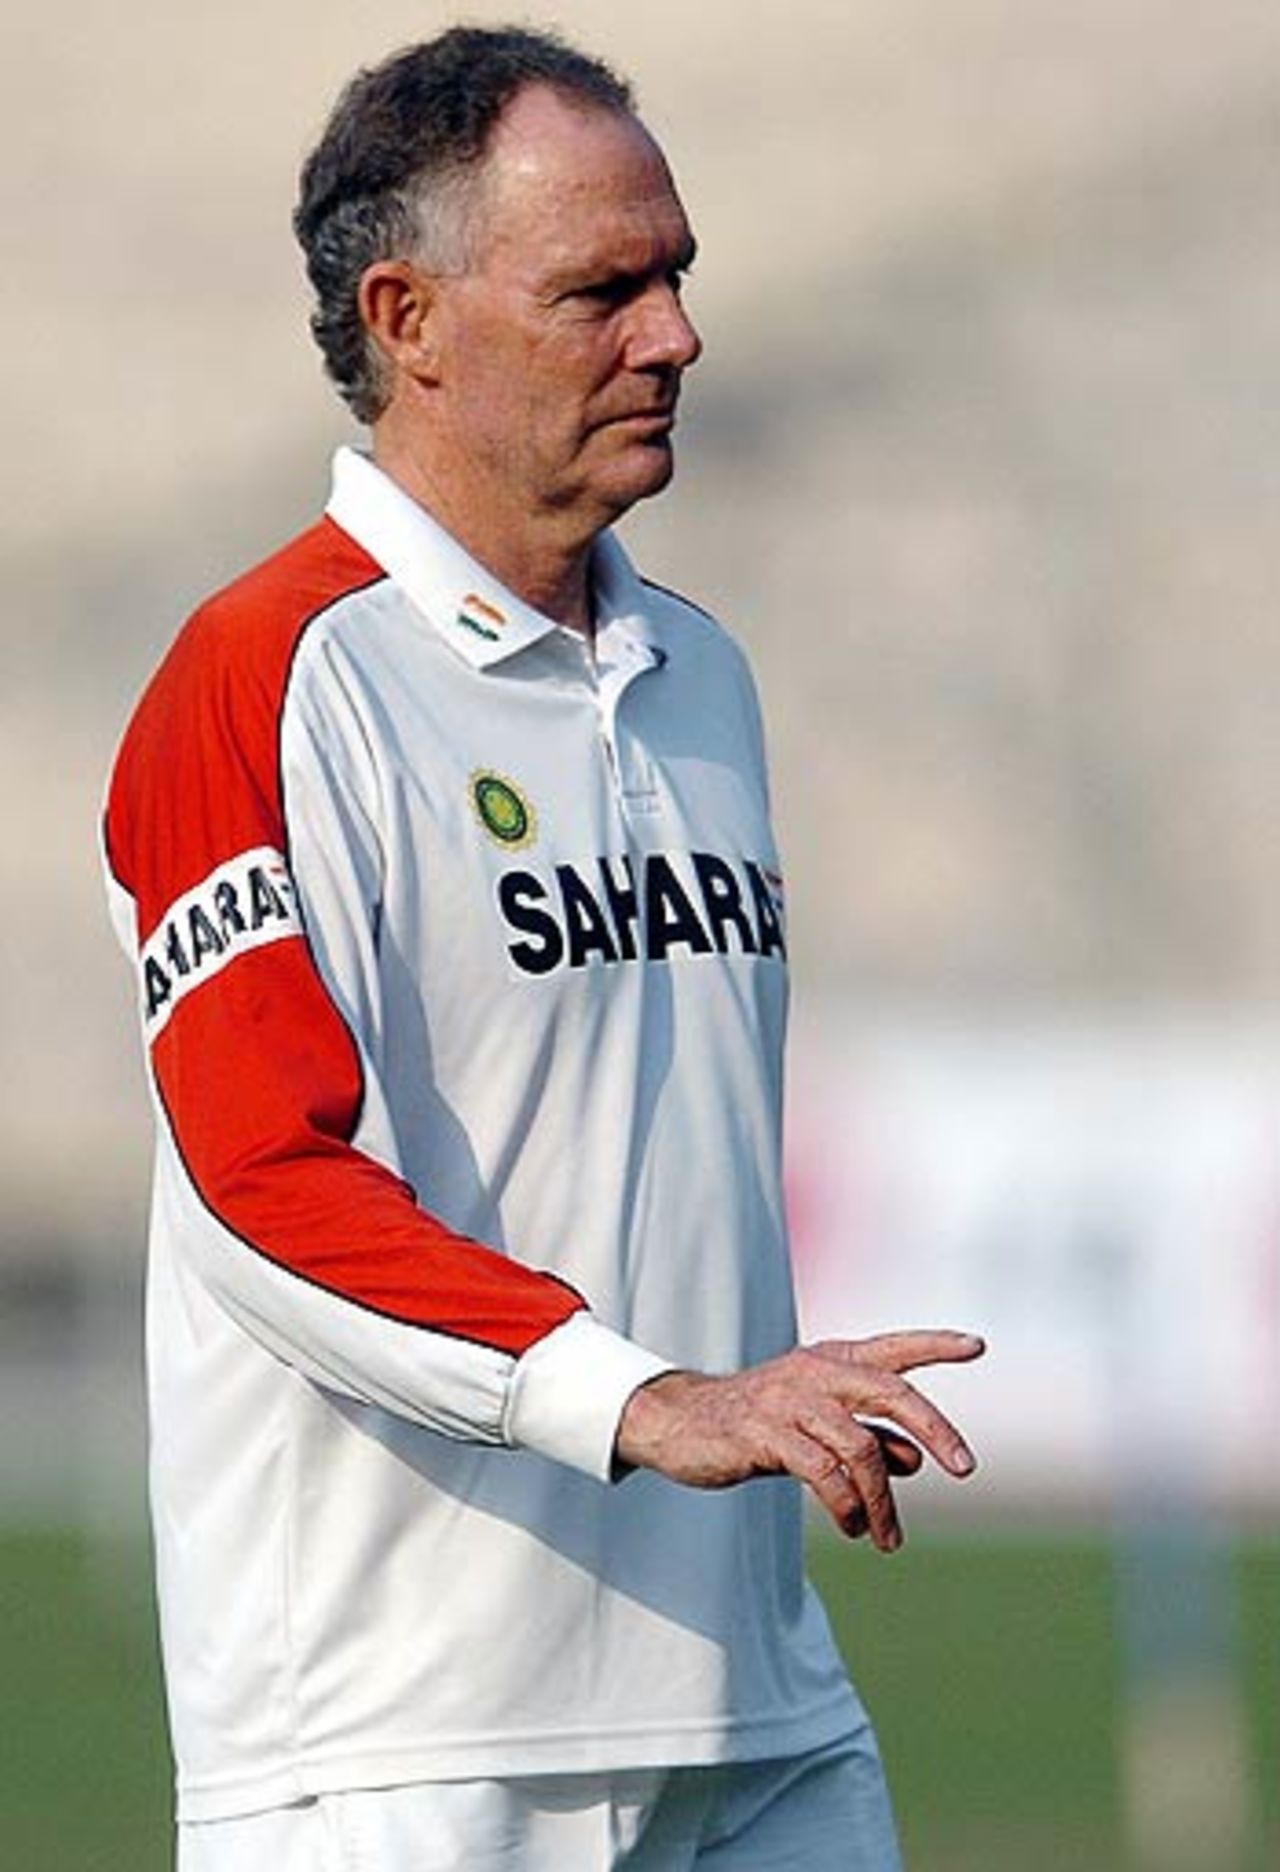 Greg Chappell instructs his players through a practice session ahead of the 4th ODI against South Africa, Eden Gardens, Kolkata, November 24, 2005